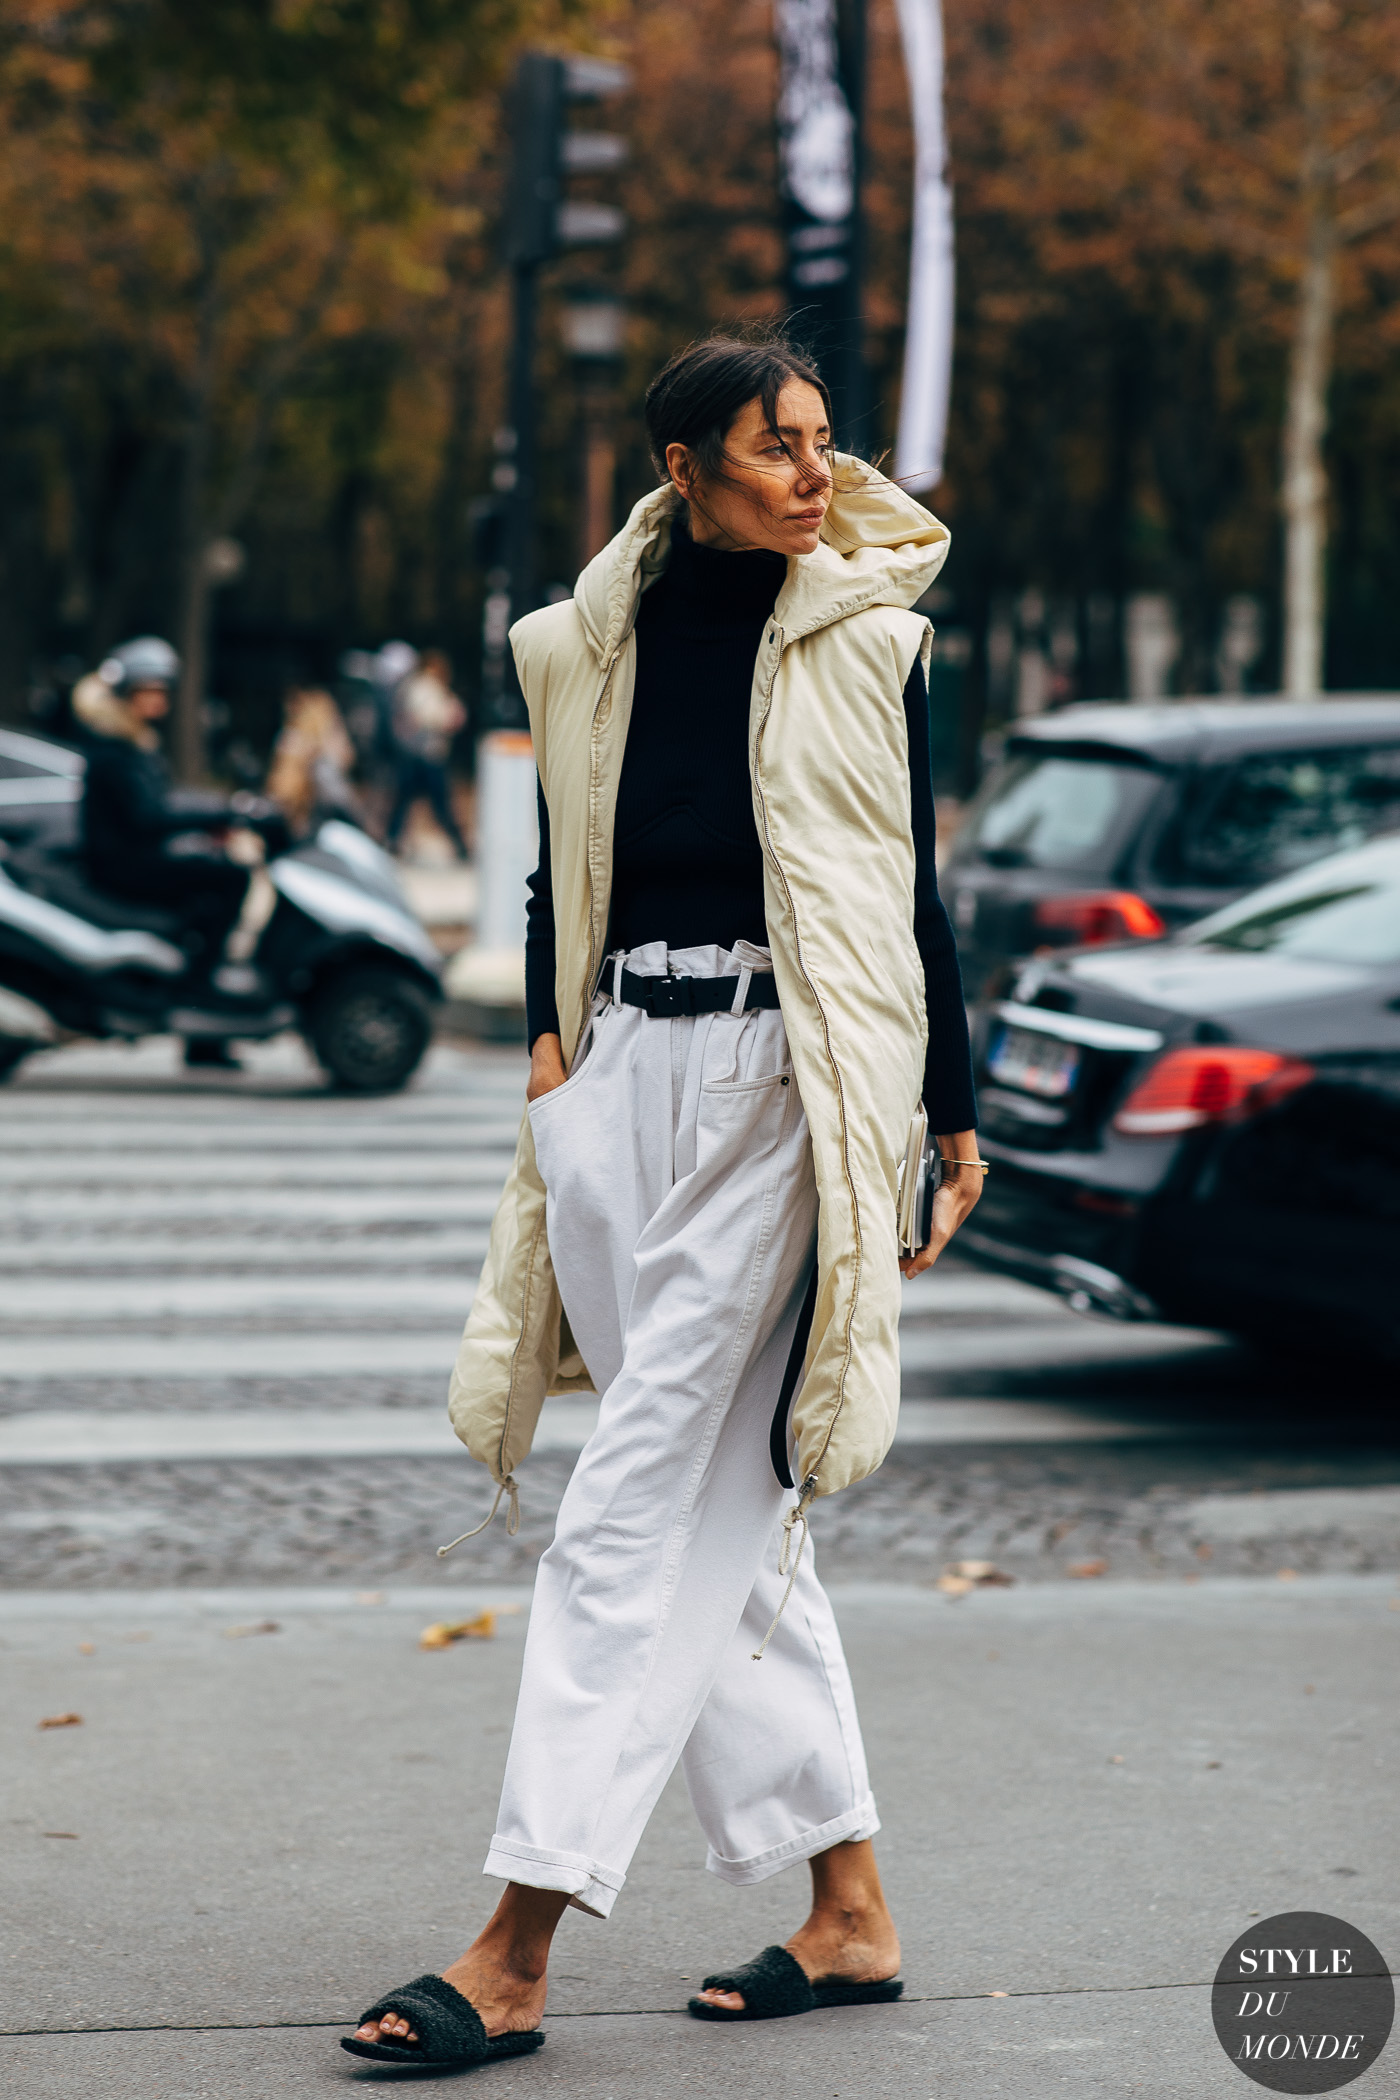 Julie Pelipas by STYLEDUMONDE Street Style Fashion Photography20181002_48A6519